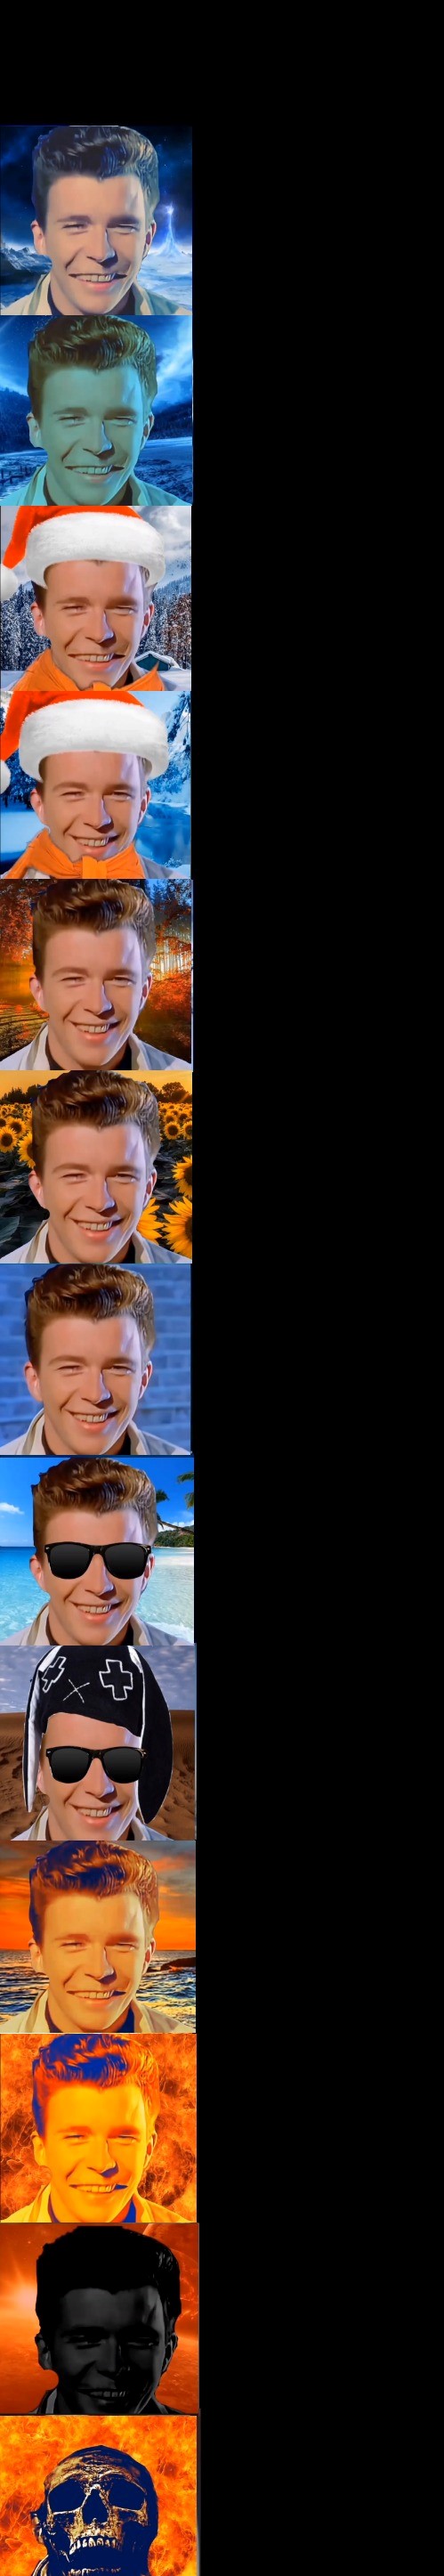 High Quality rick astley becoming cold to hot Blank Meme Template